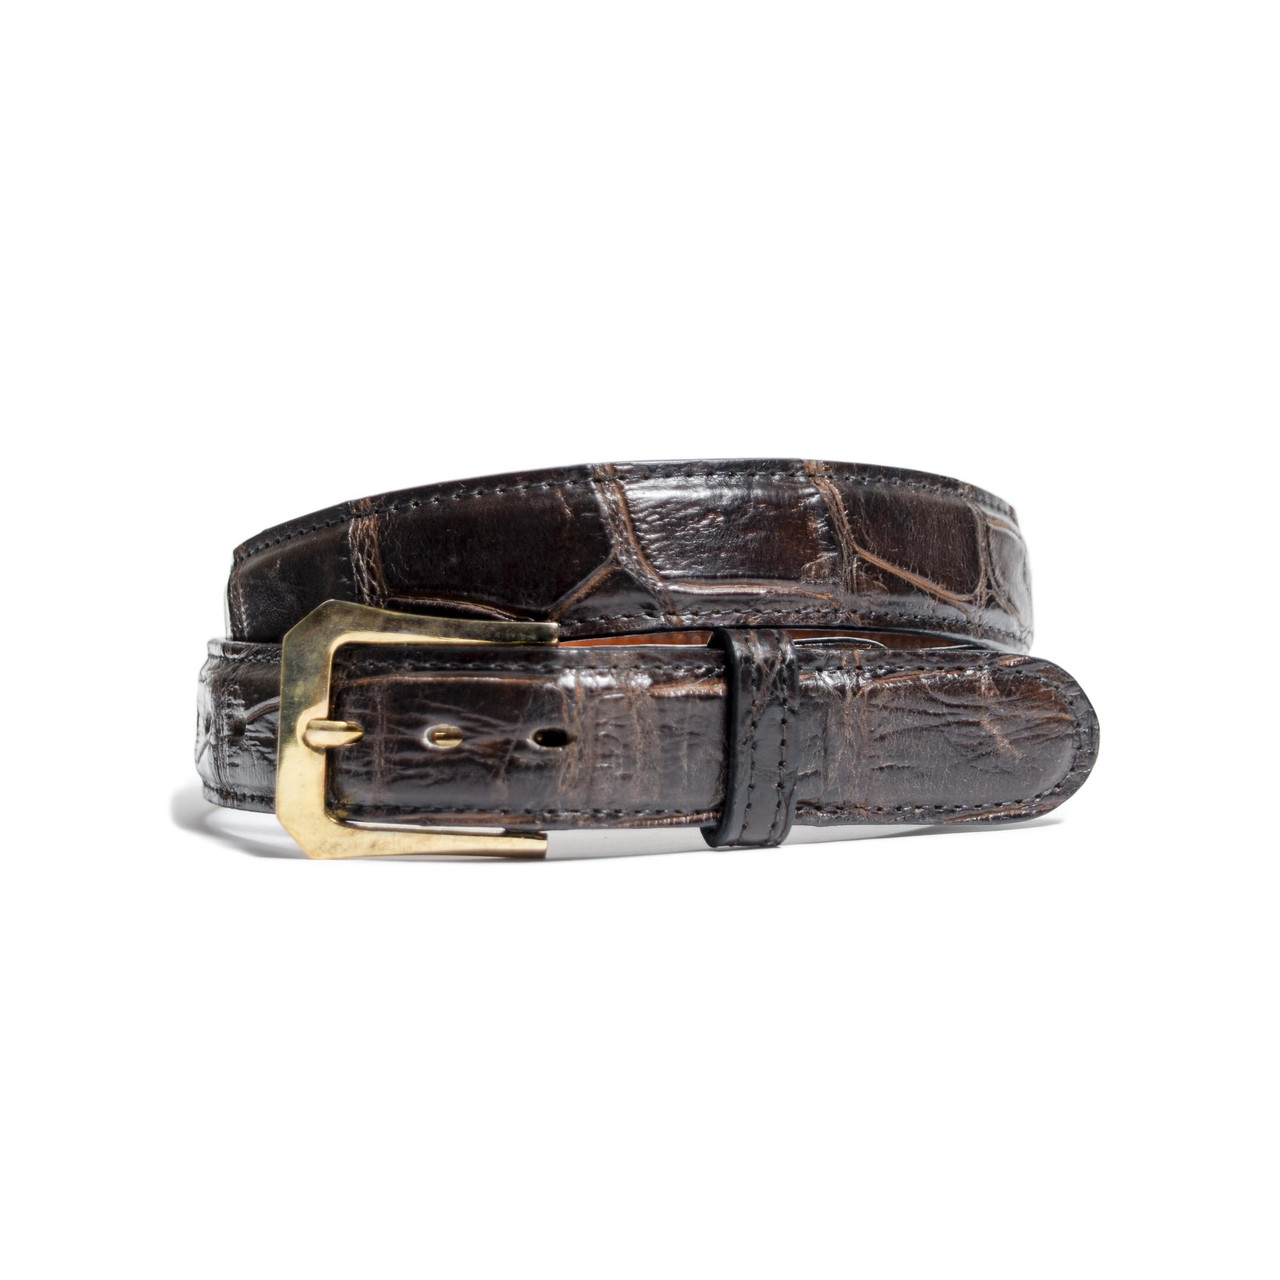 Accessories, Exquisite Elegance With Highquality Crocodile Pattern Leather  Belt Size 4749